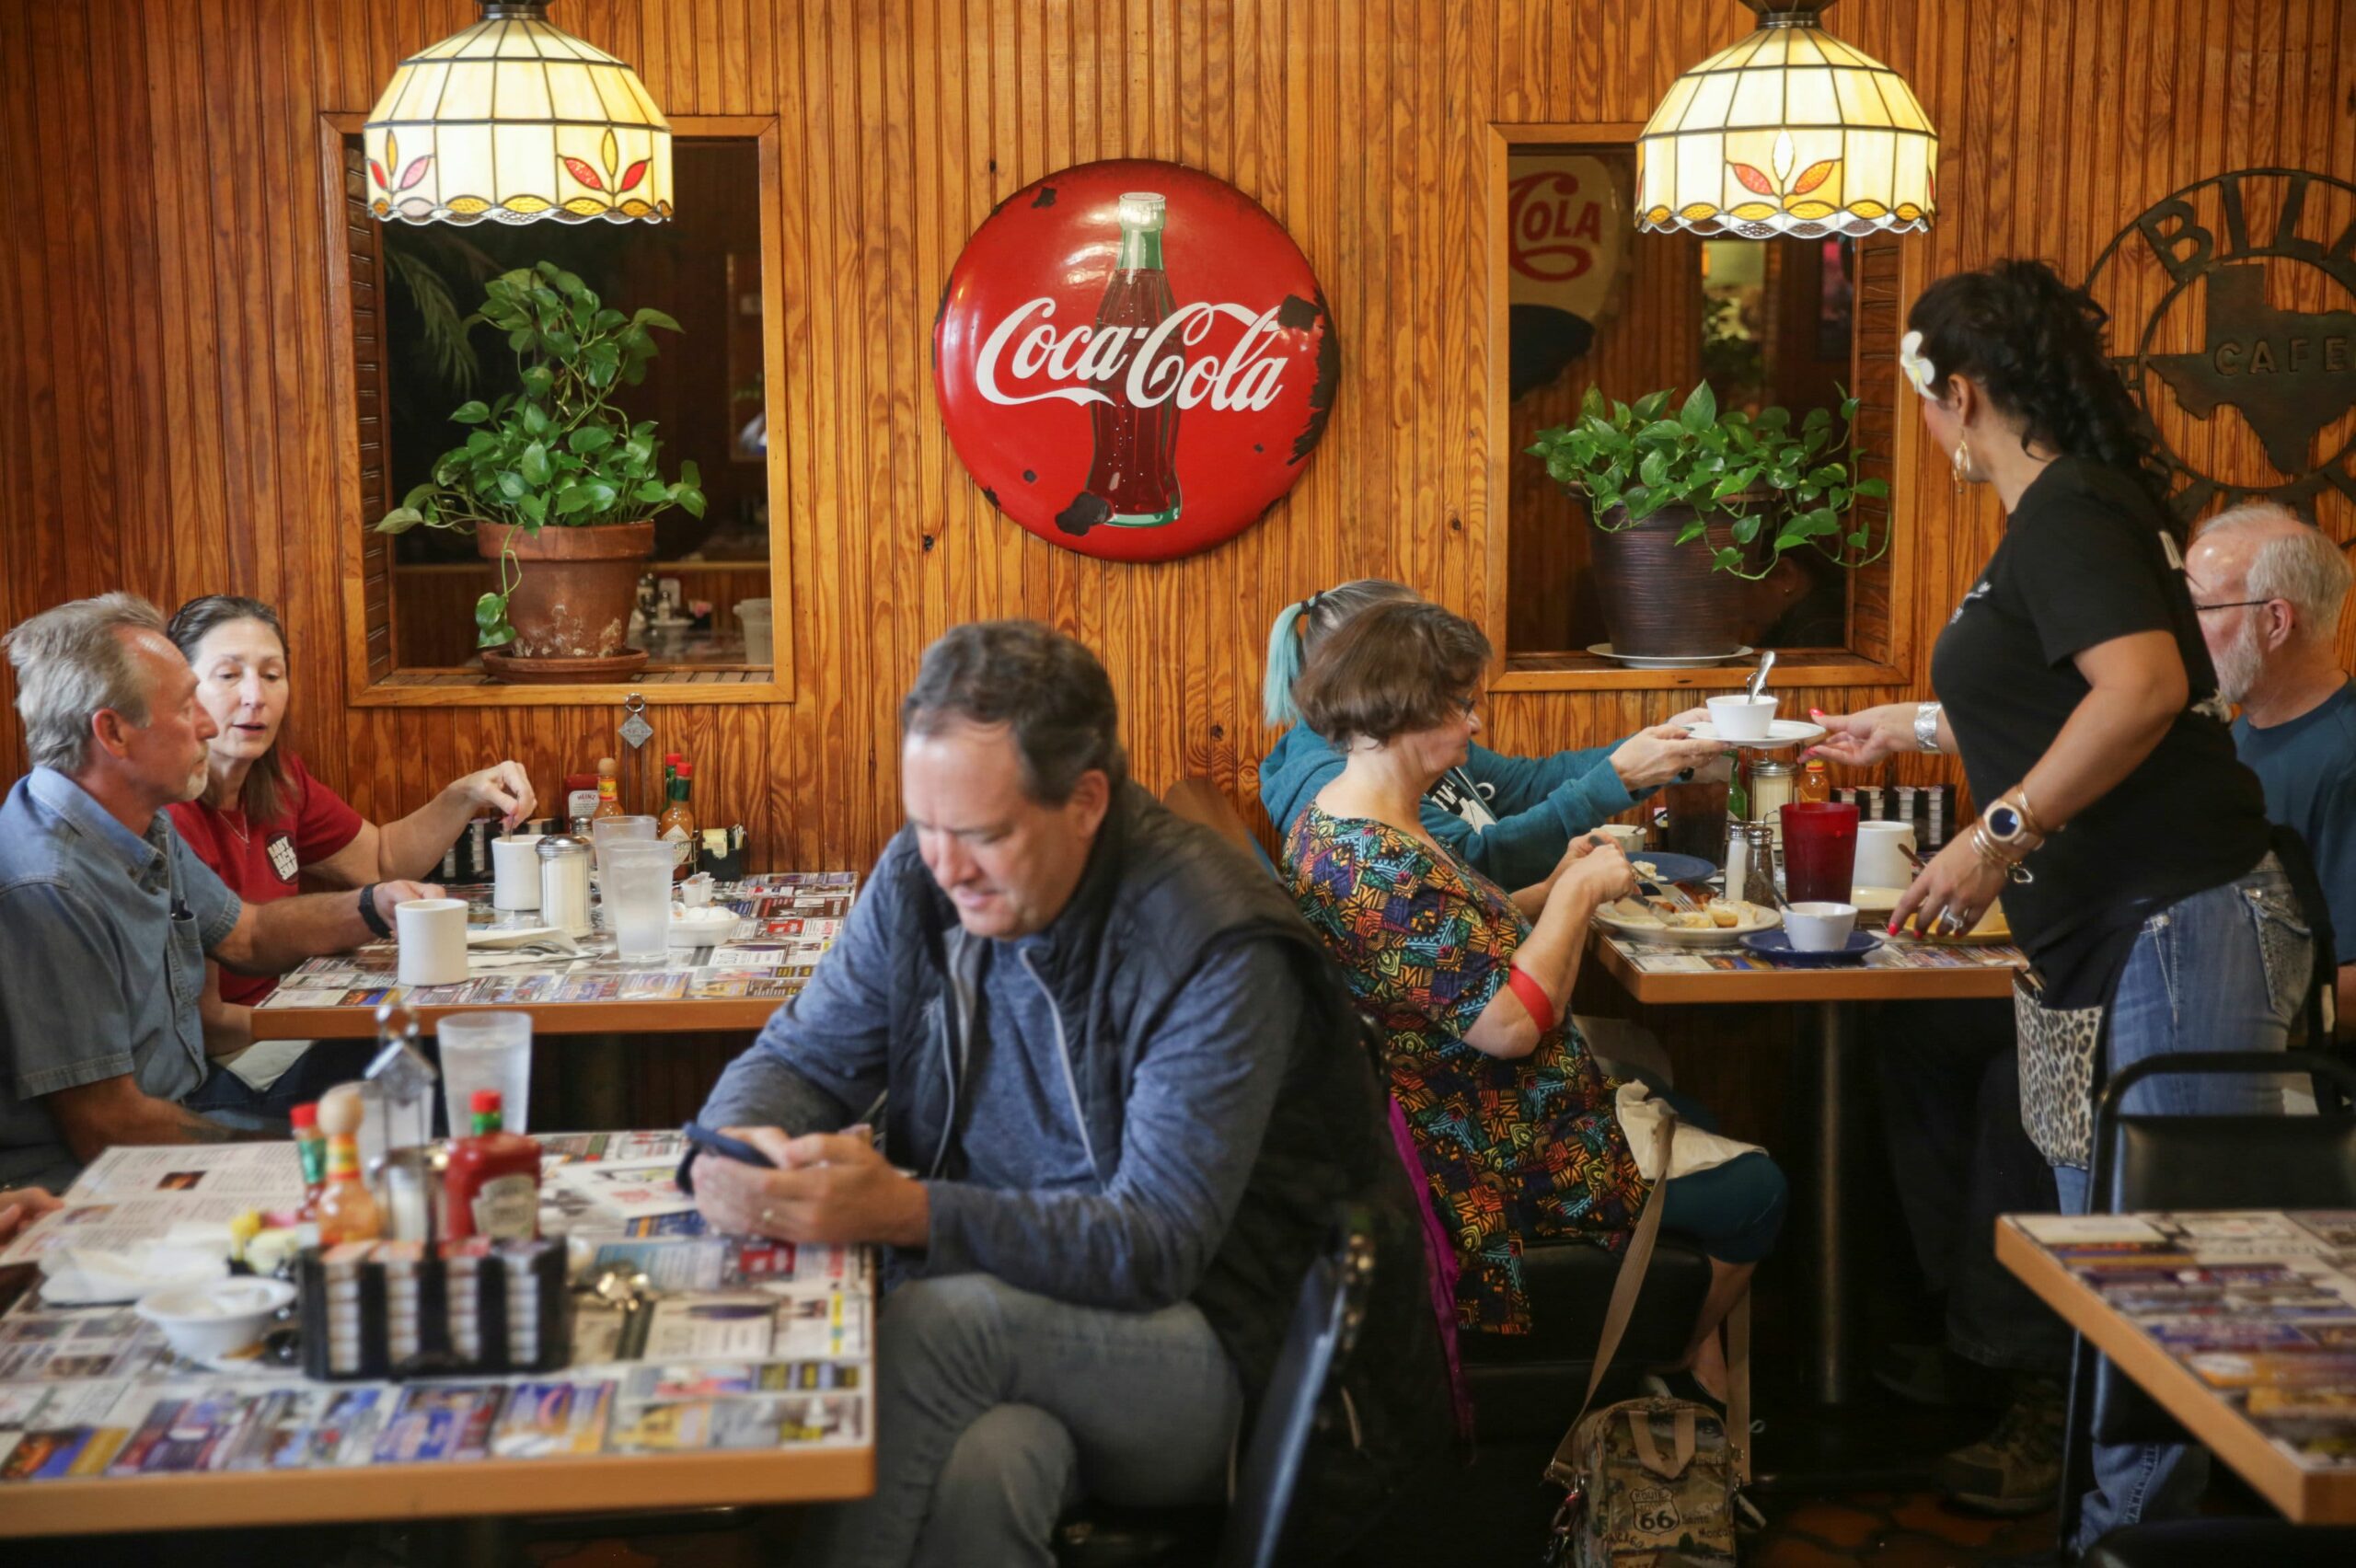 Eating places are feeling a labor crunch. Teenagers are an unlikely resolution